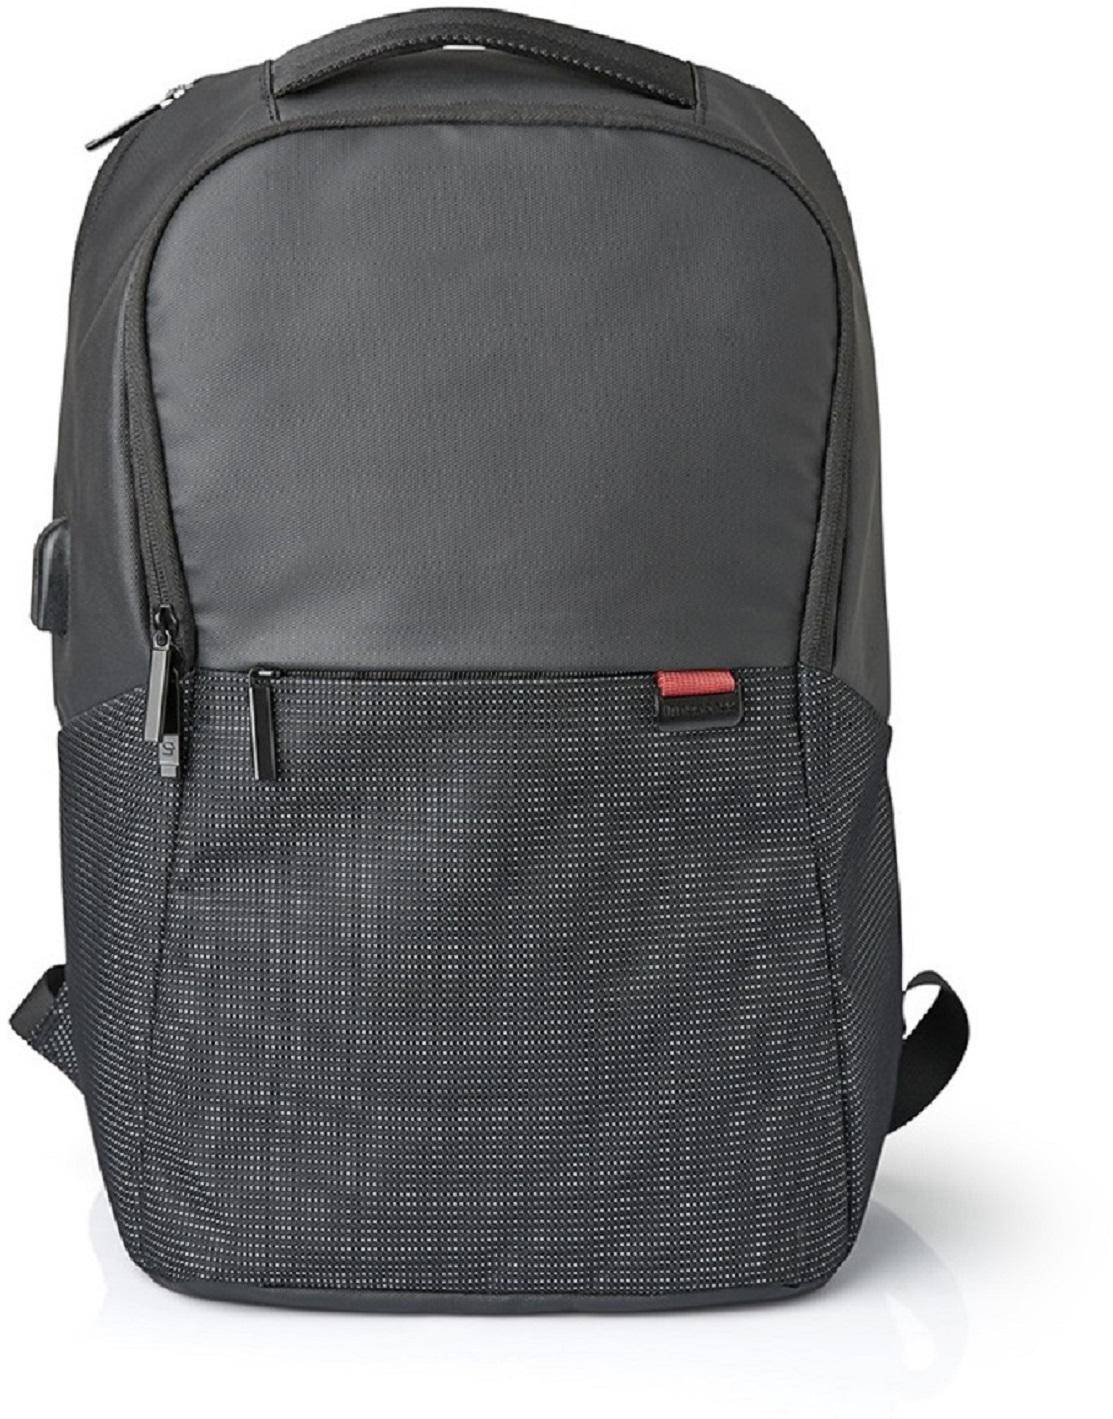 Neopack Bolt Backpack 15 inches for Laptops and Macbooks zoom image